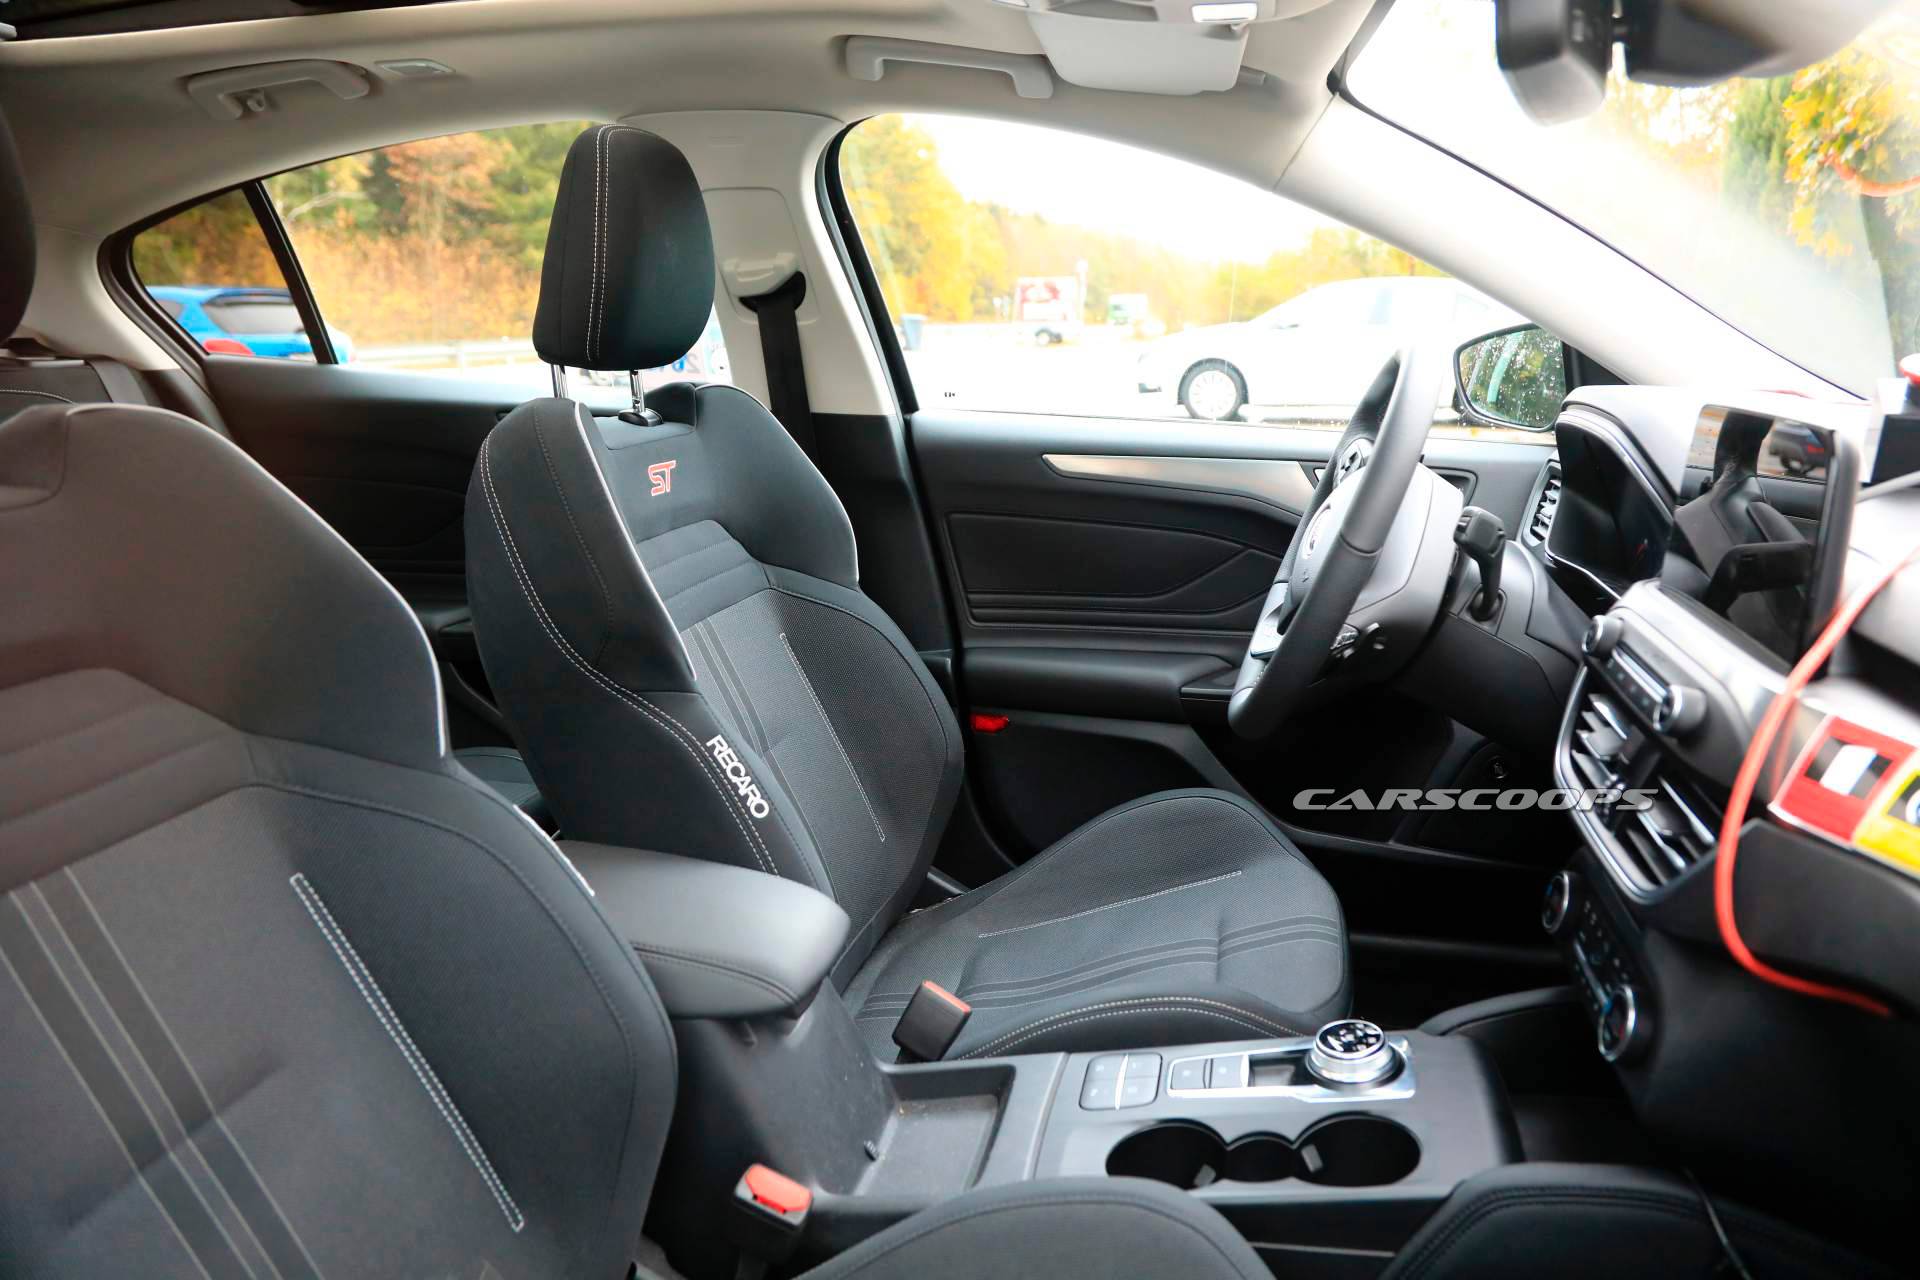 2019 Ford Focus ST: Here It Is In Production Form, Interior Included